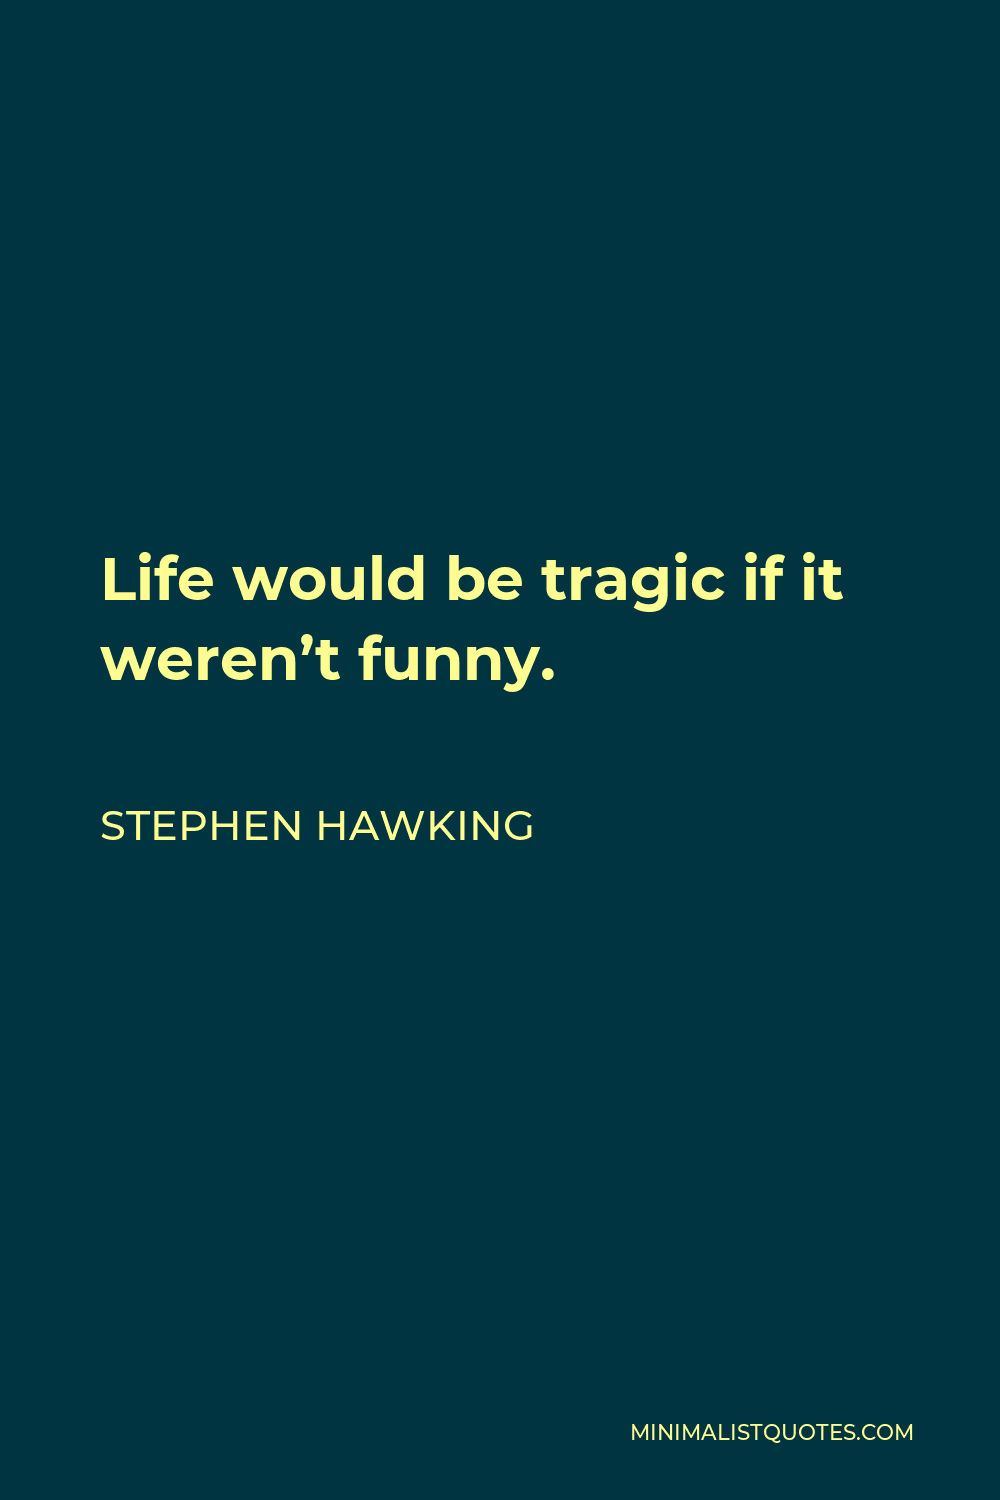 Stephen Hawking Quote - Life would be tragic if it weren’t funny.